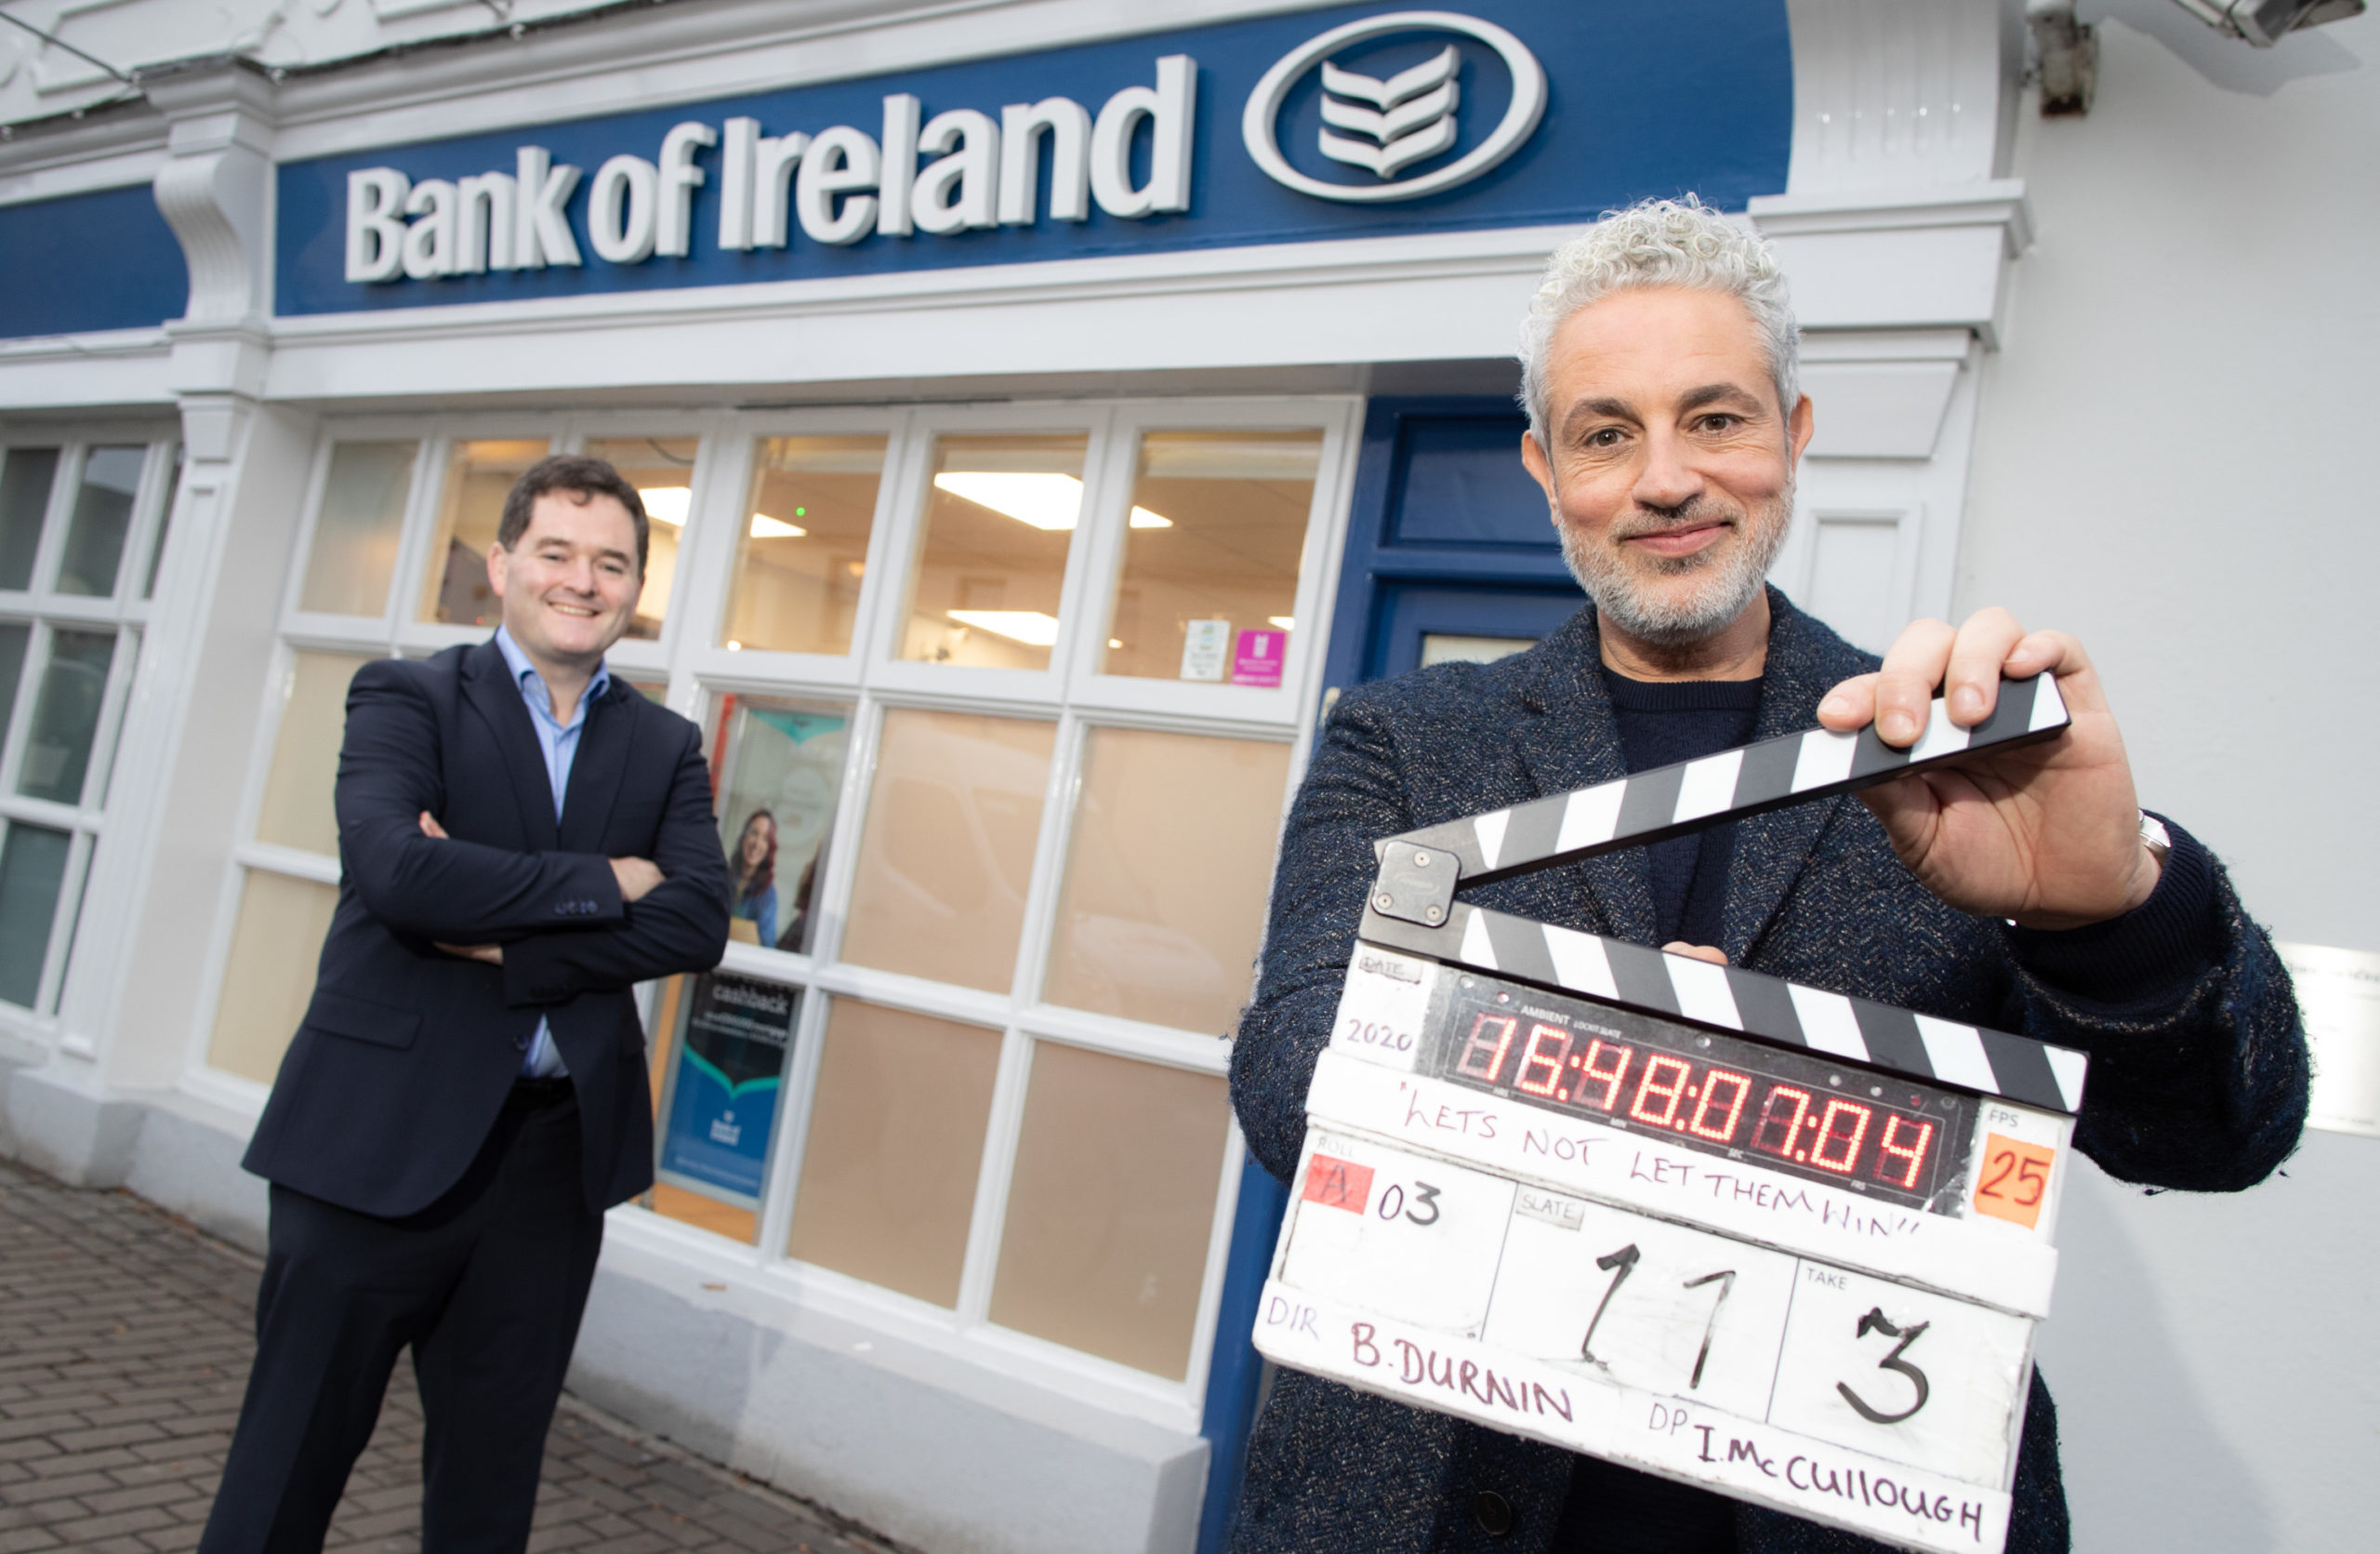 Bank of Ireland fraud campaign with Baz Ashmawy